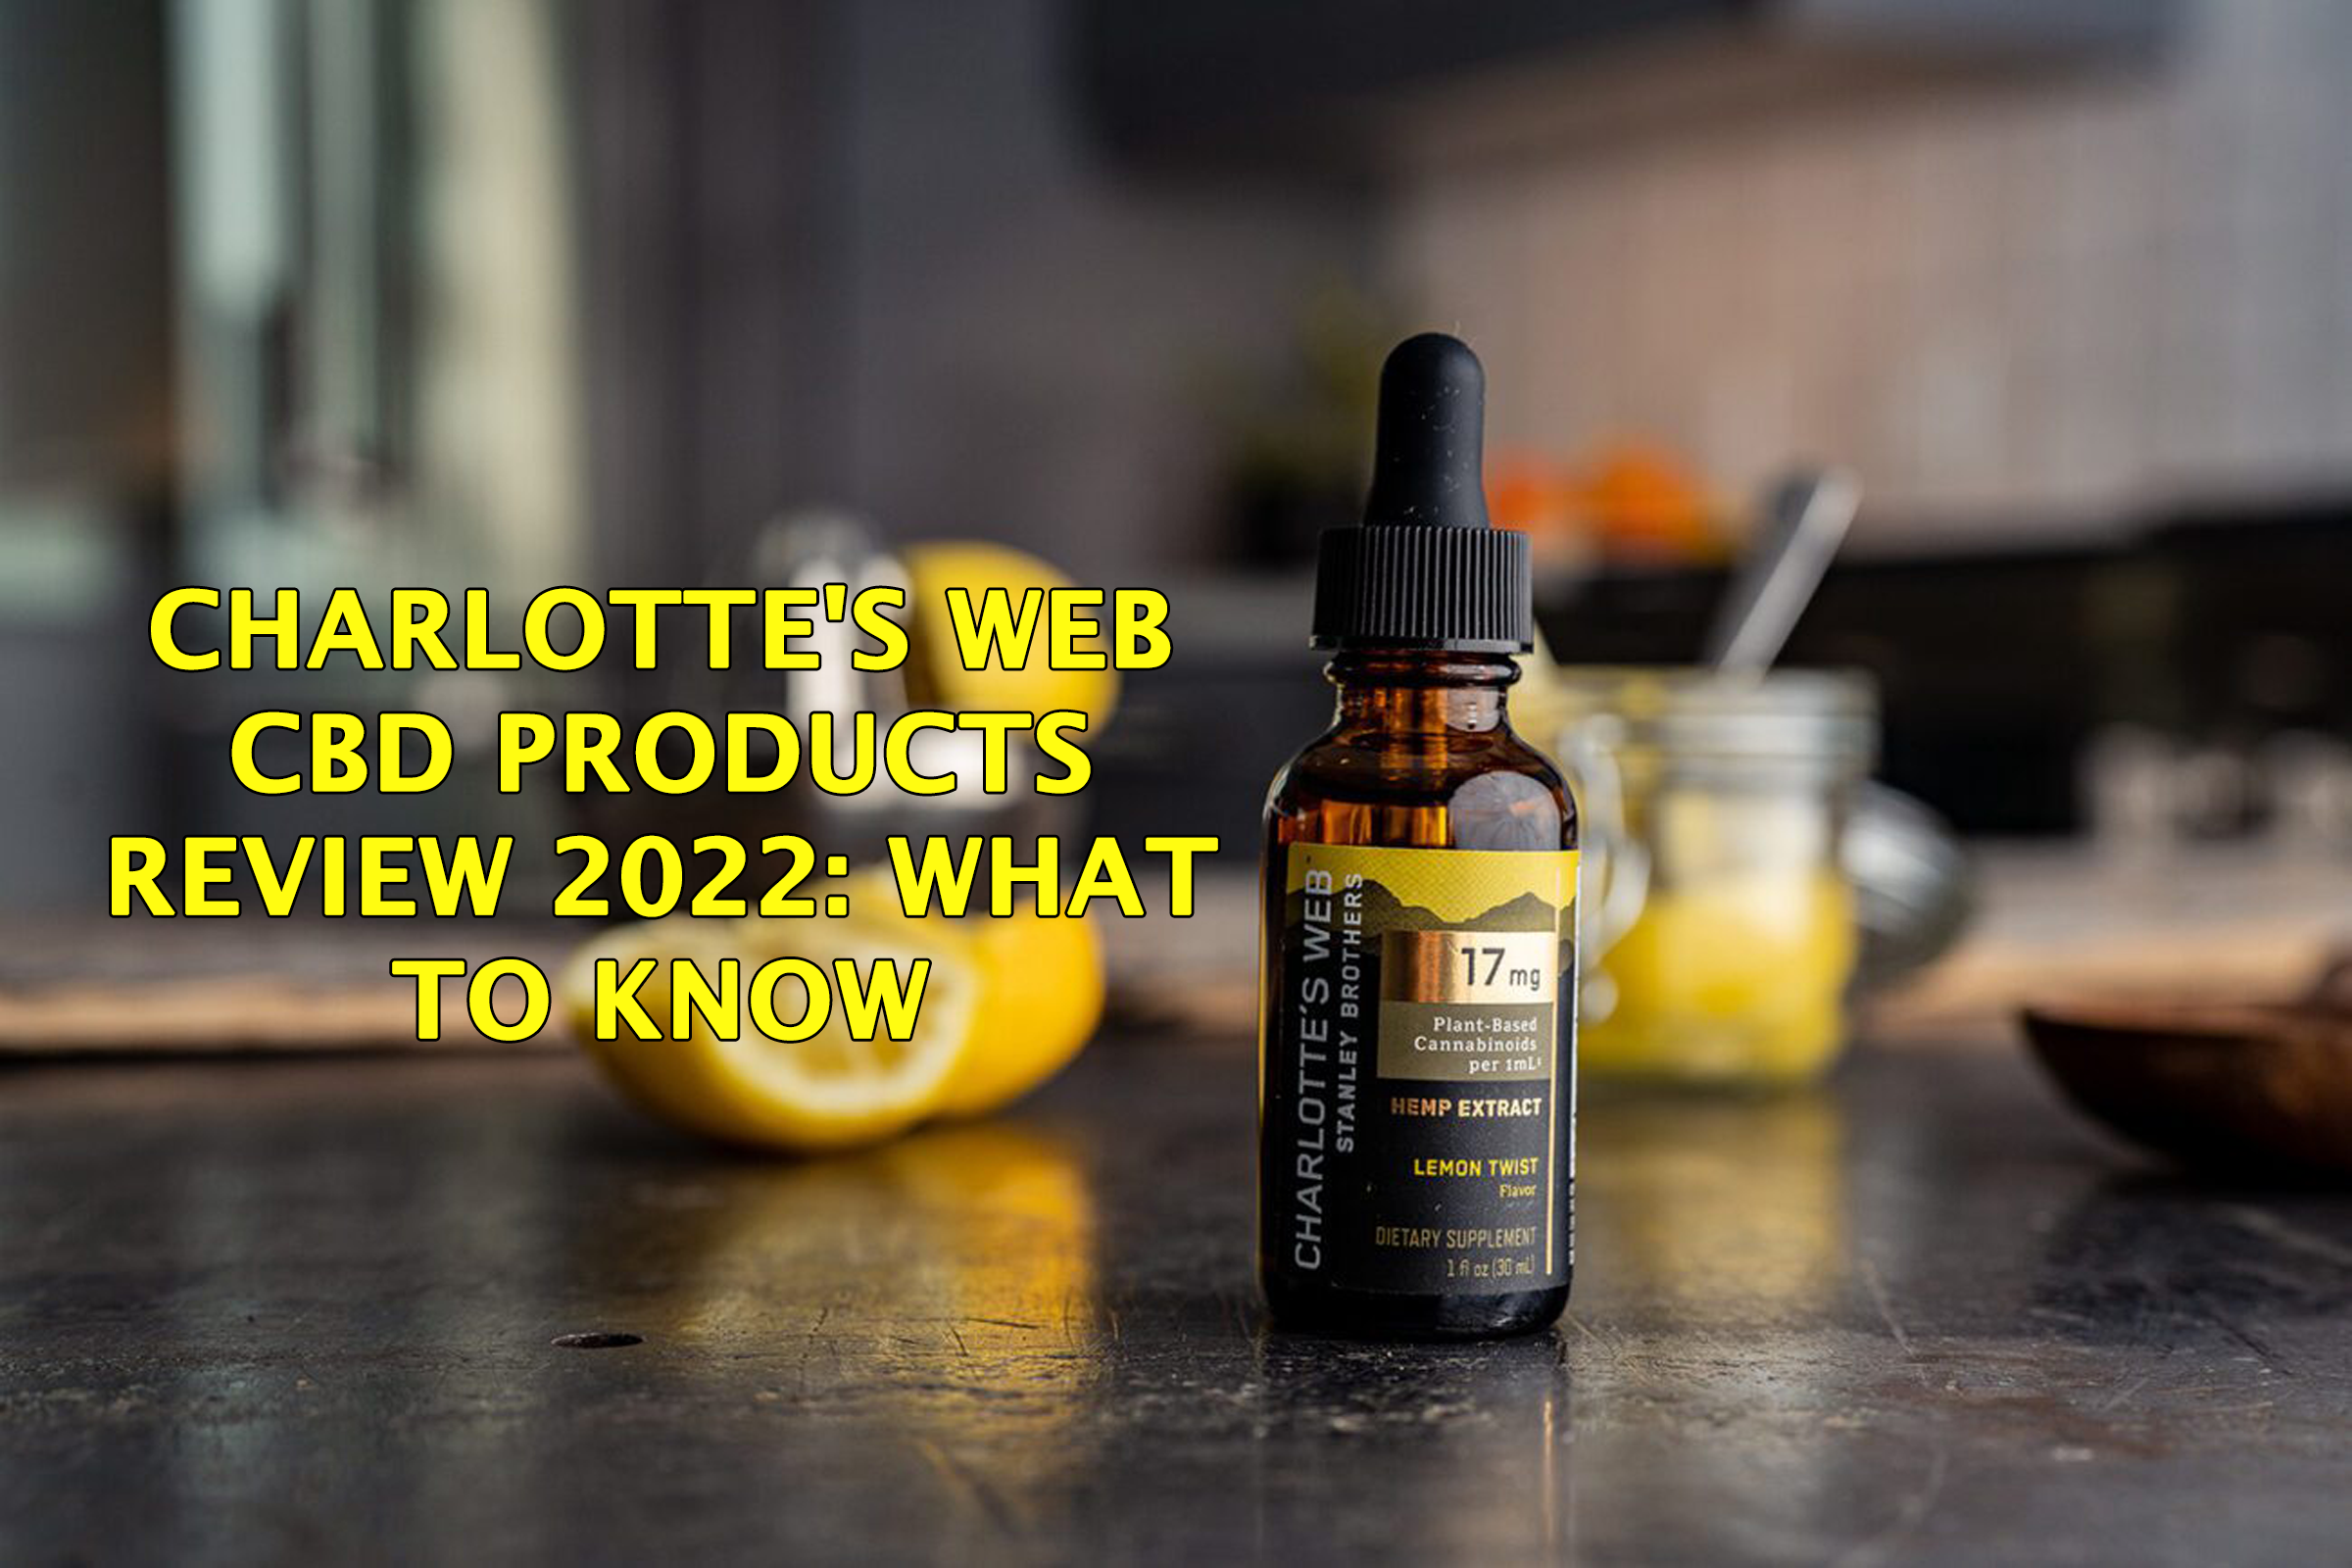 Charlotte’s Web CBD products review 2022: What to know